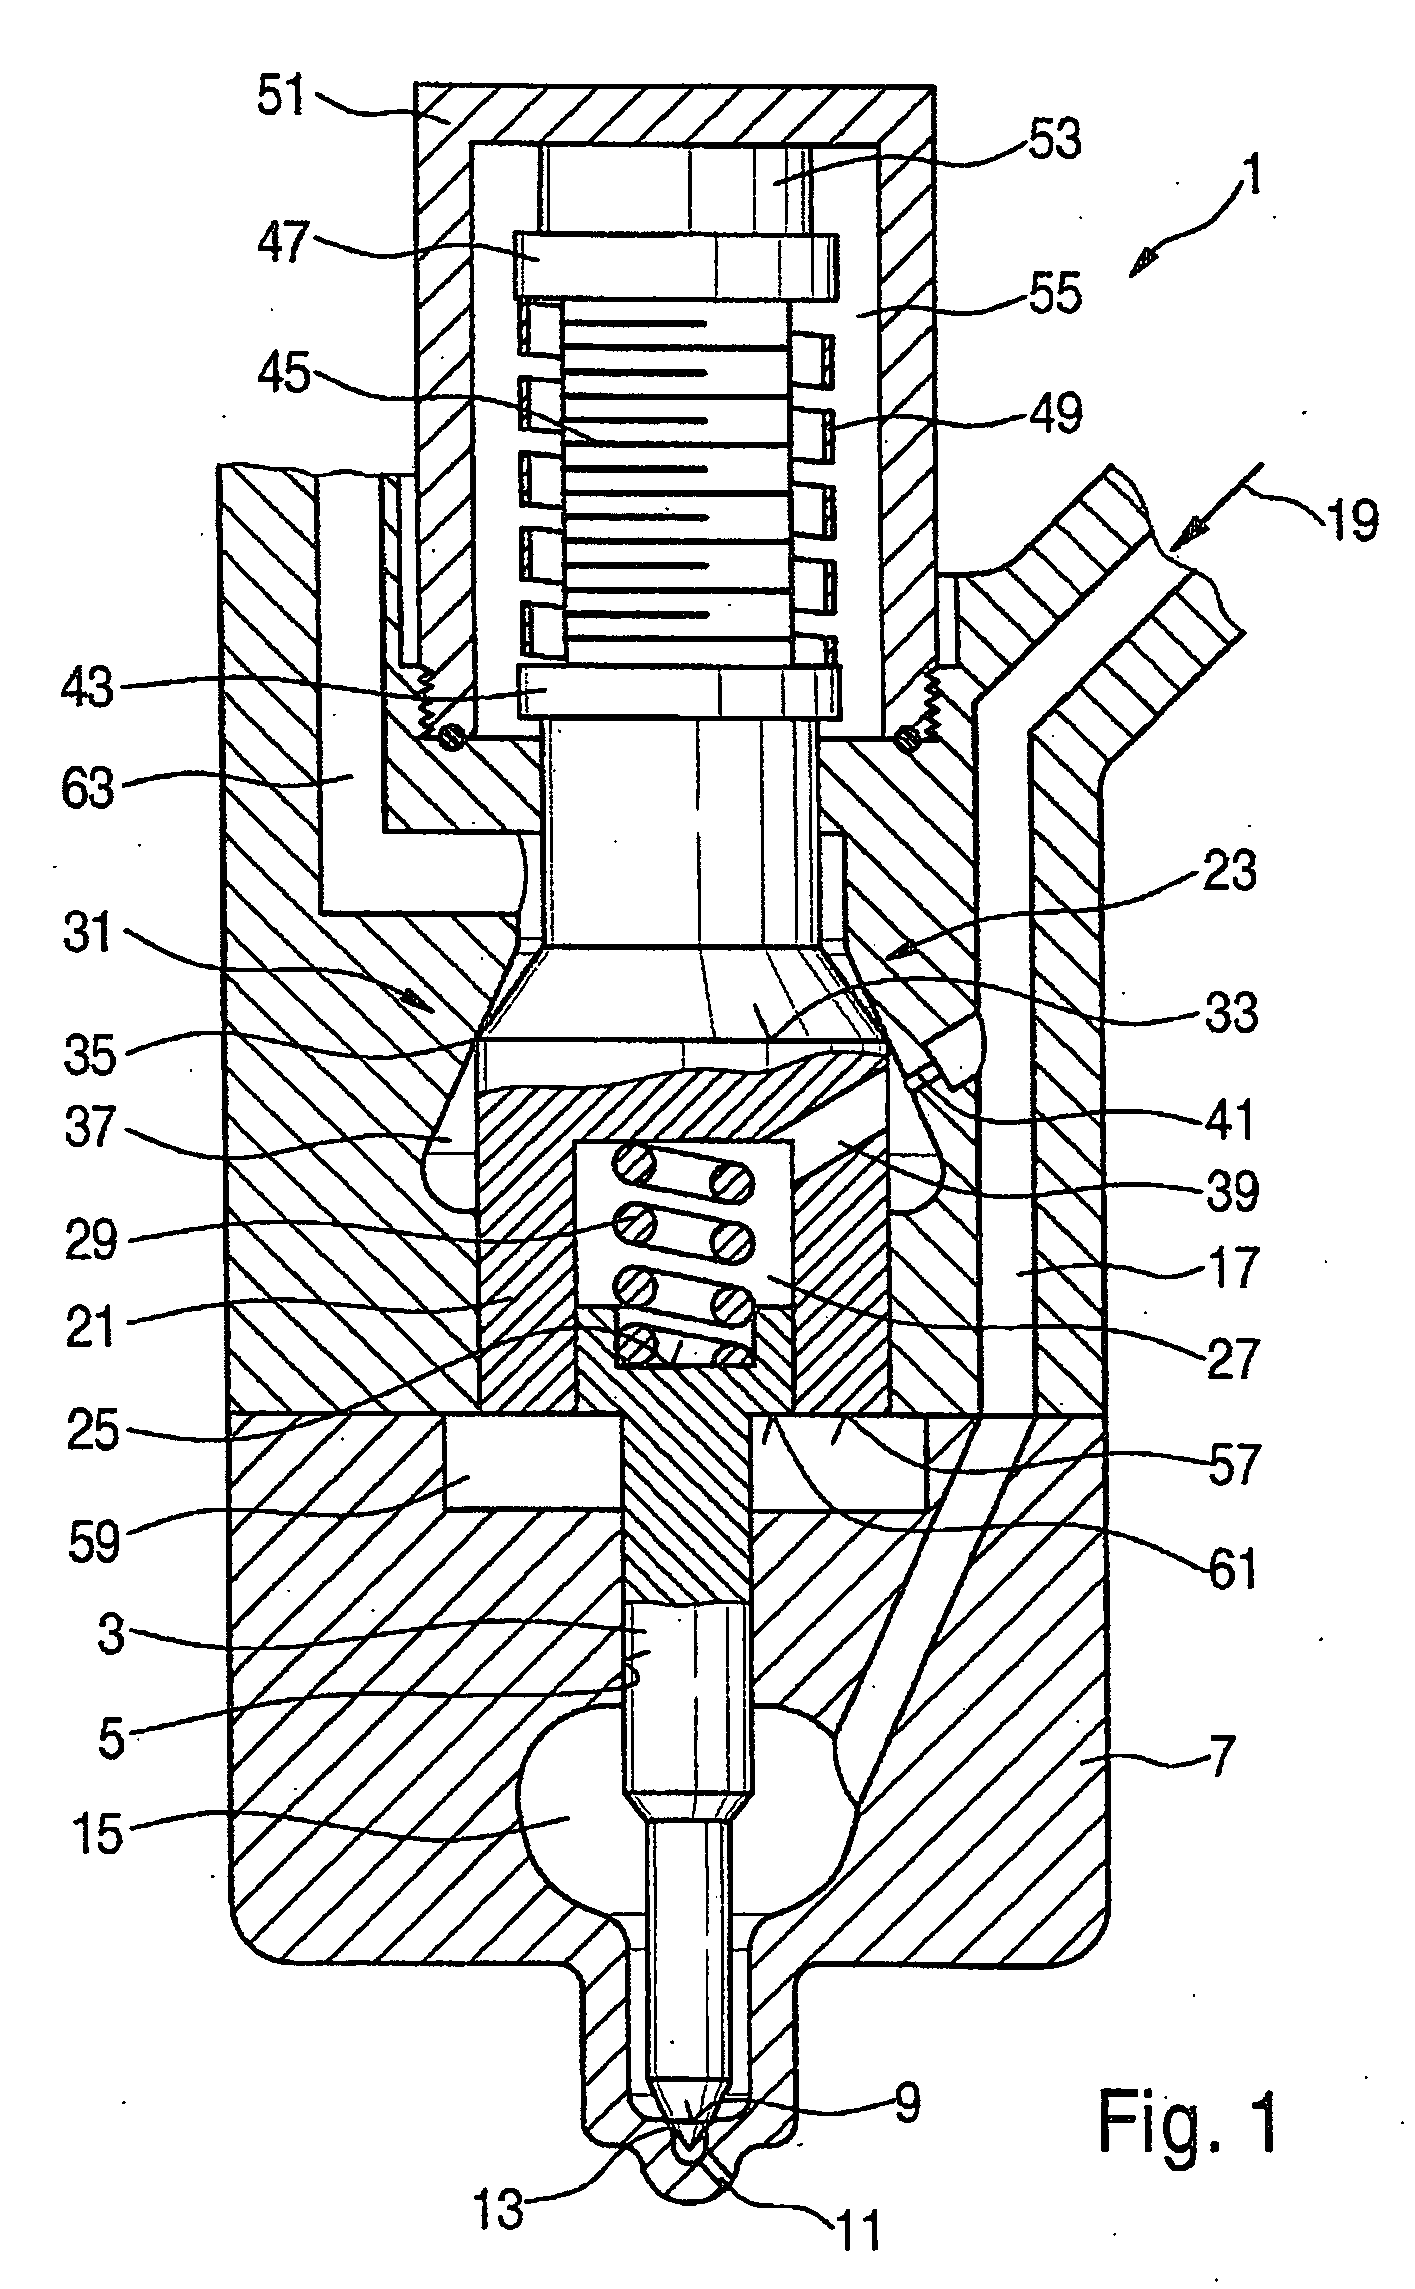 Fuel injector with direct needle control and servo valve support